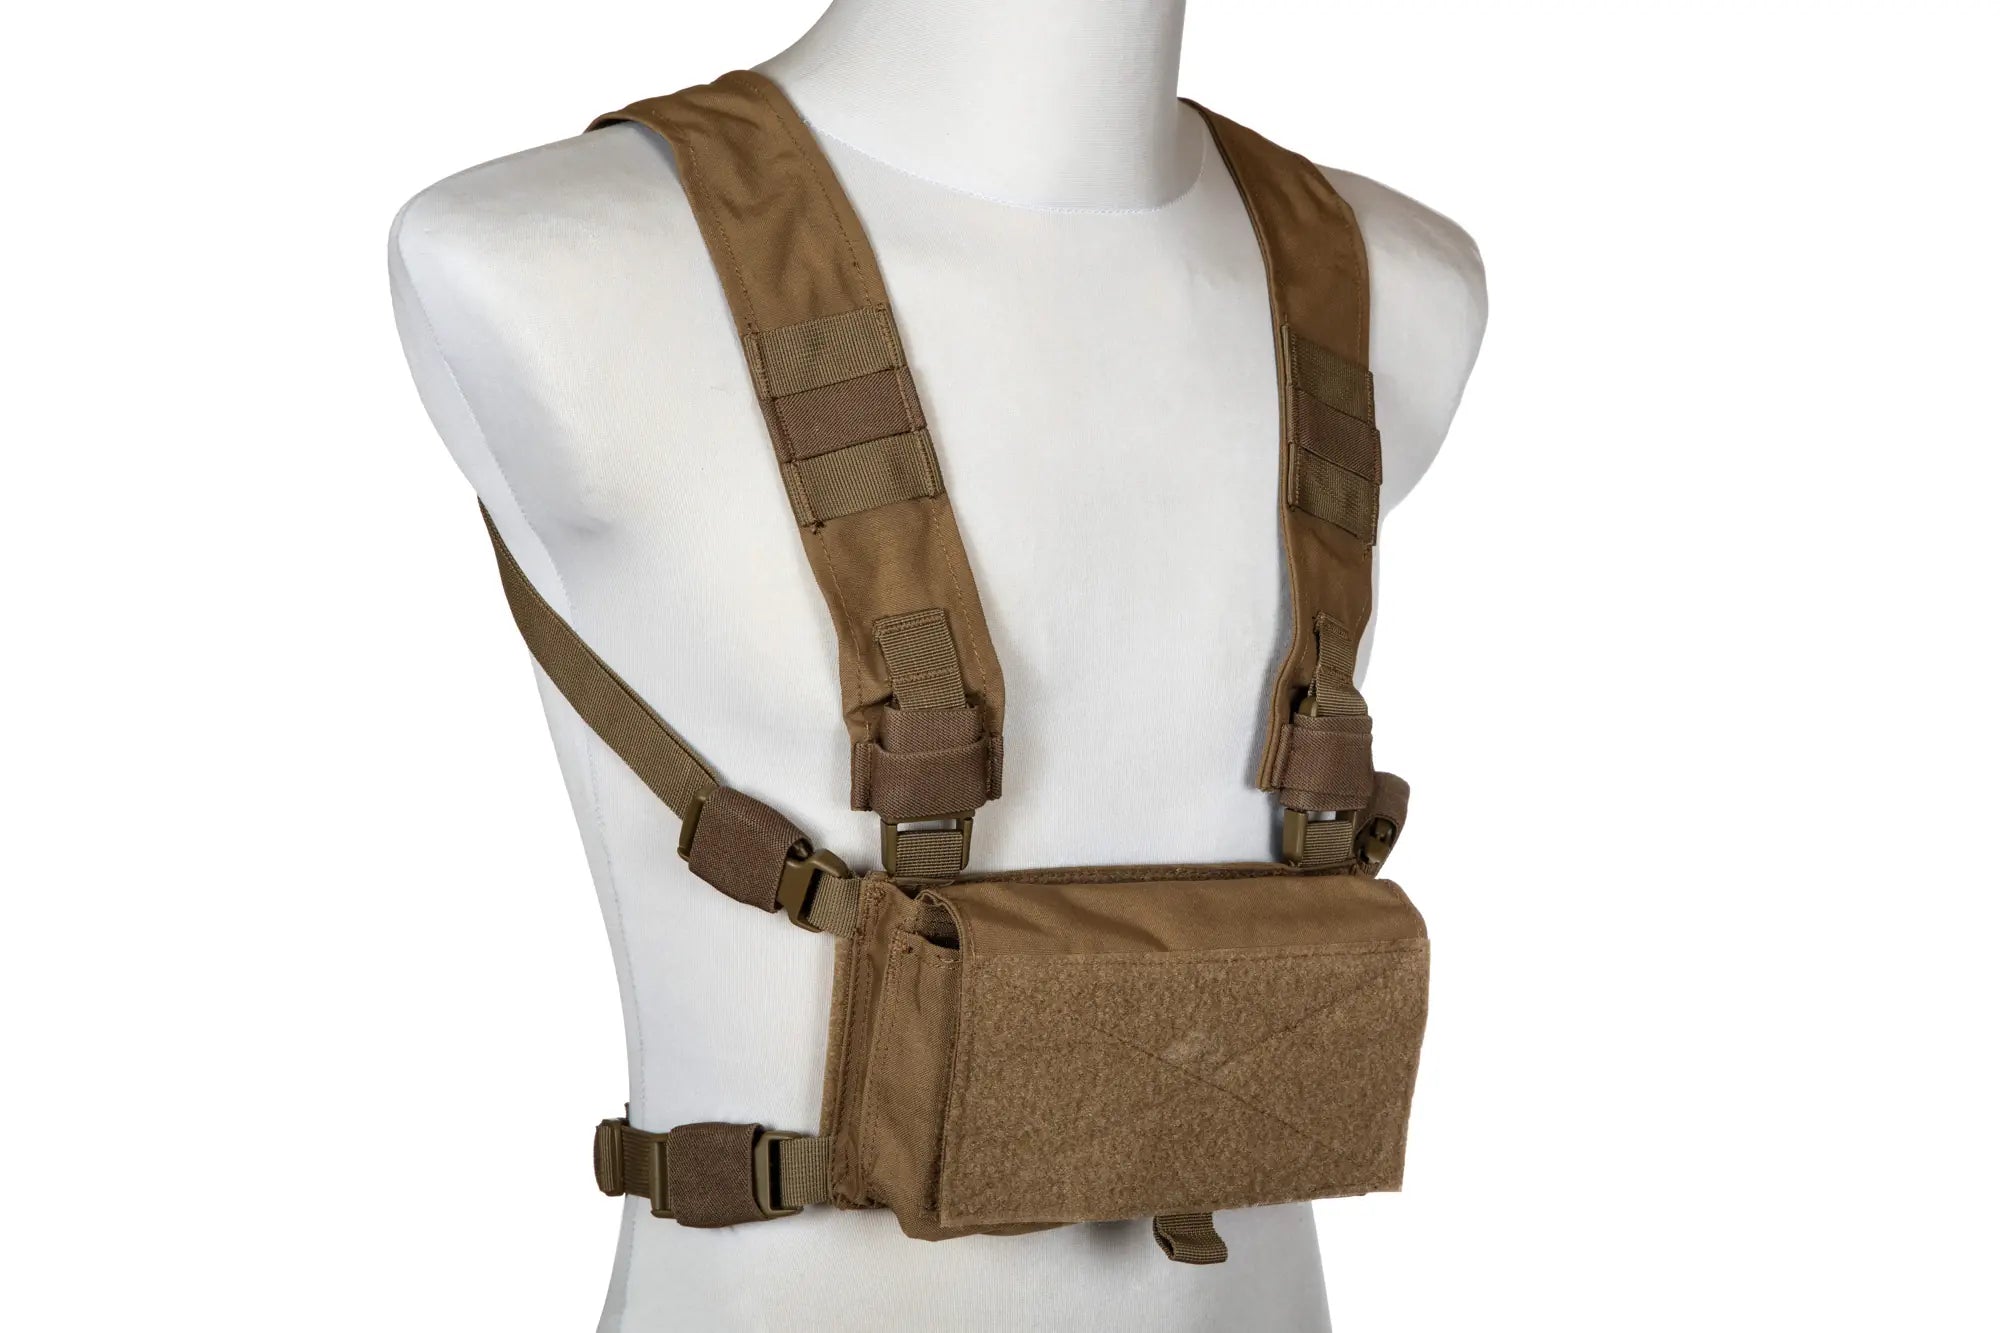 VX Buckle Up Utility Rig Tactical Vest - Coyote Brown-2